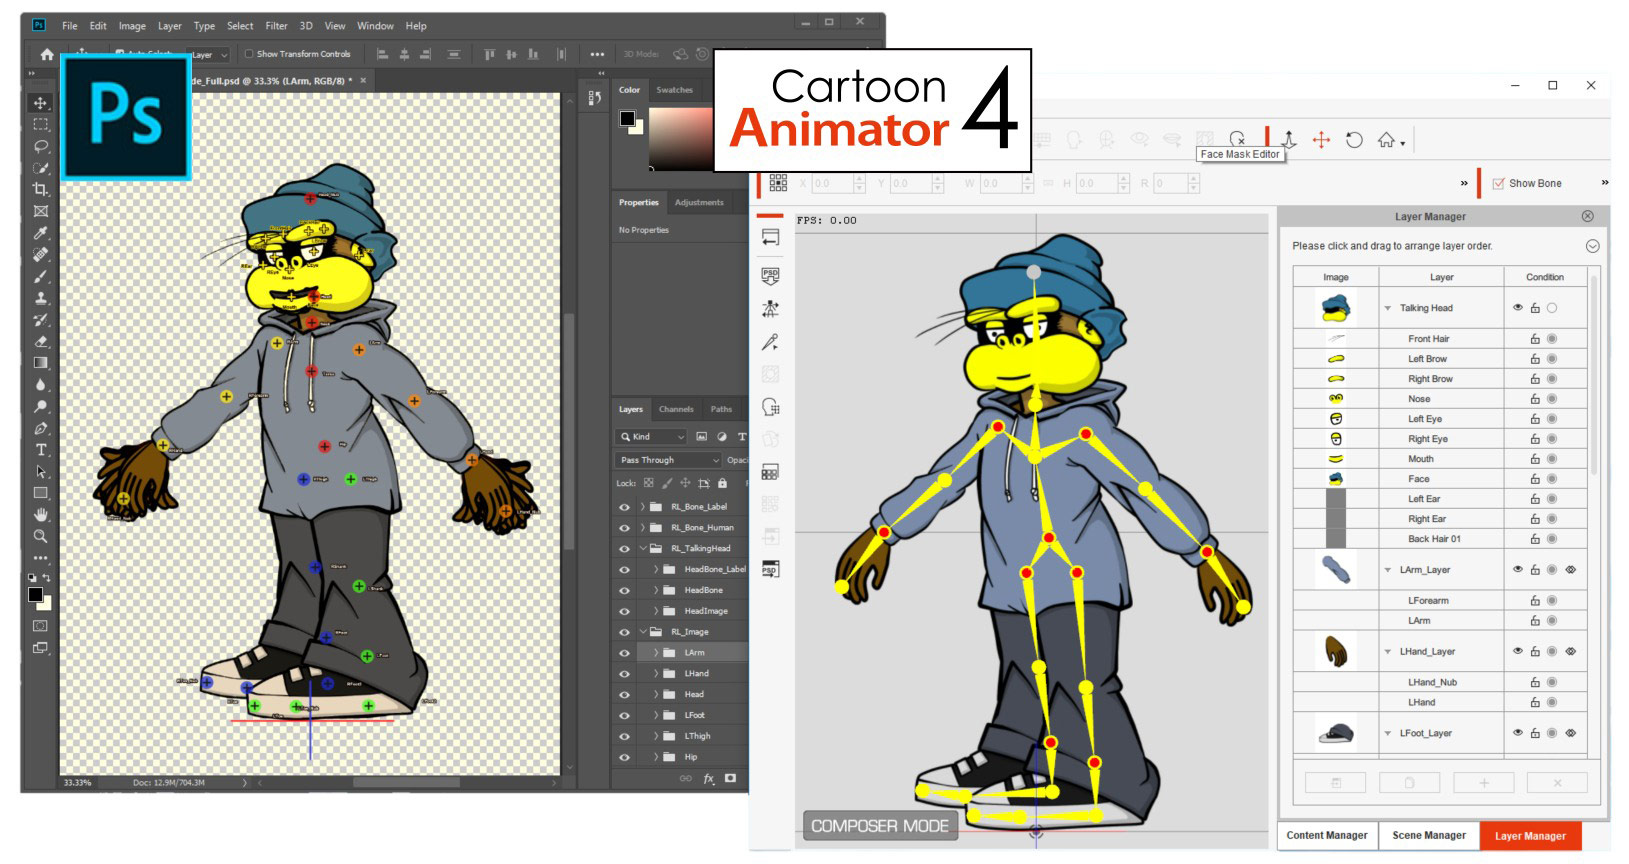 Cartoon Animator makes it easy to create and rig your characters with Photoshop templates for standard character types, which can then be imported directly into the application.